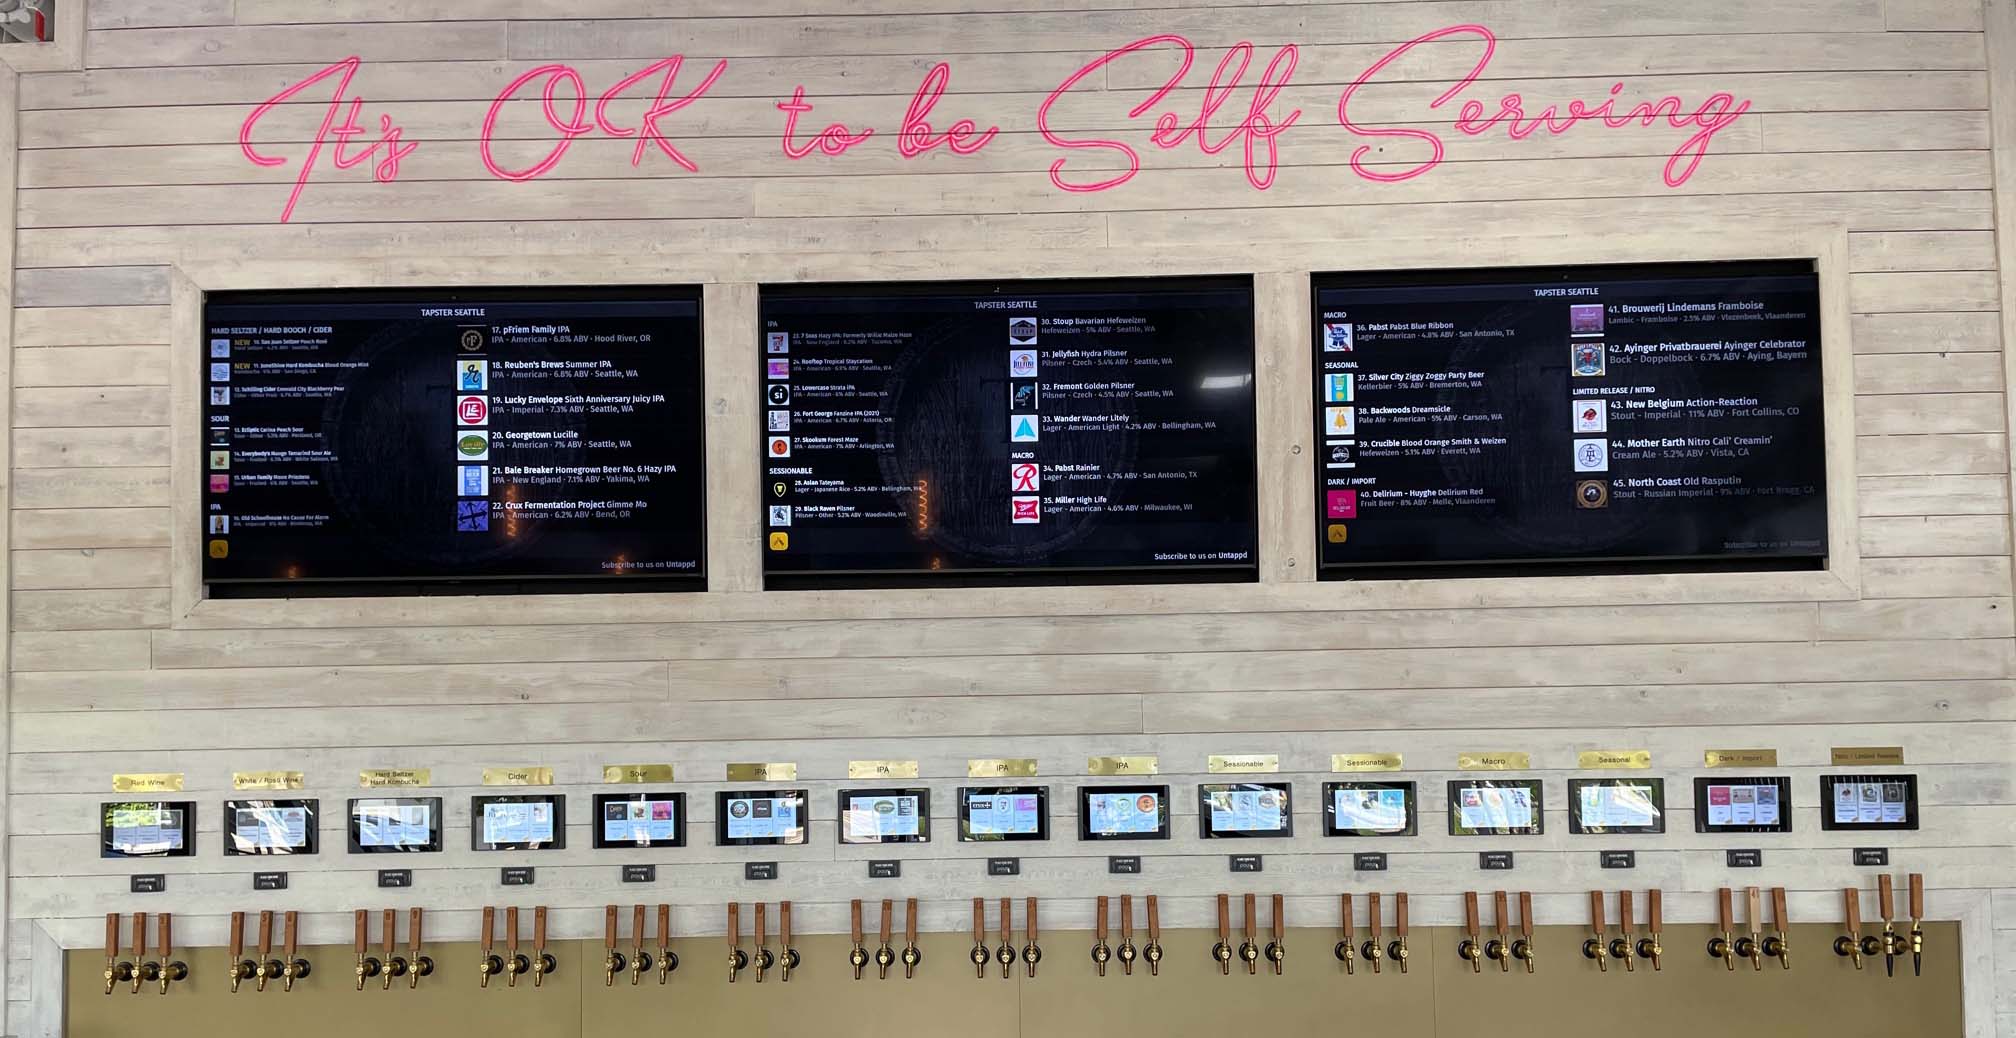 Wall display of touch screen taps for beer sampling.